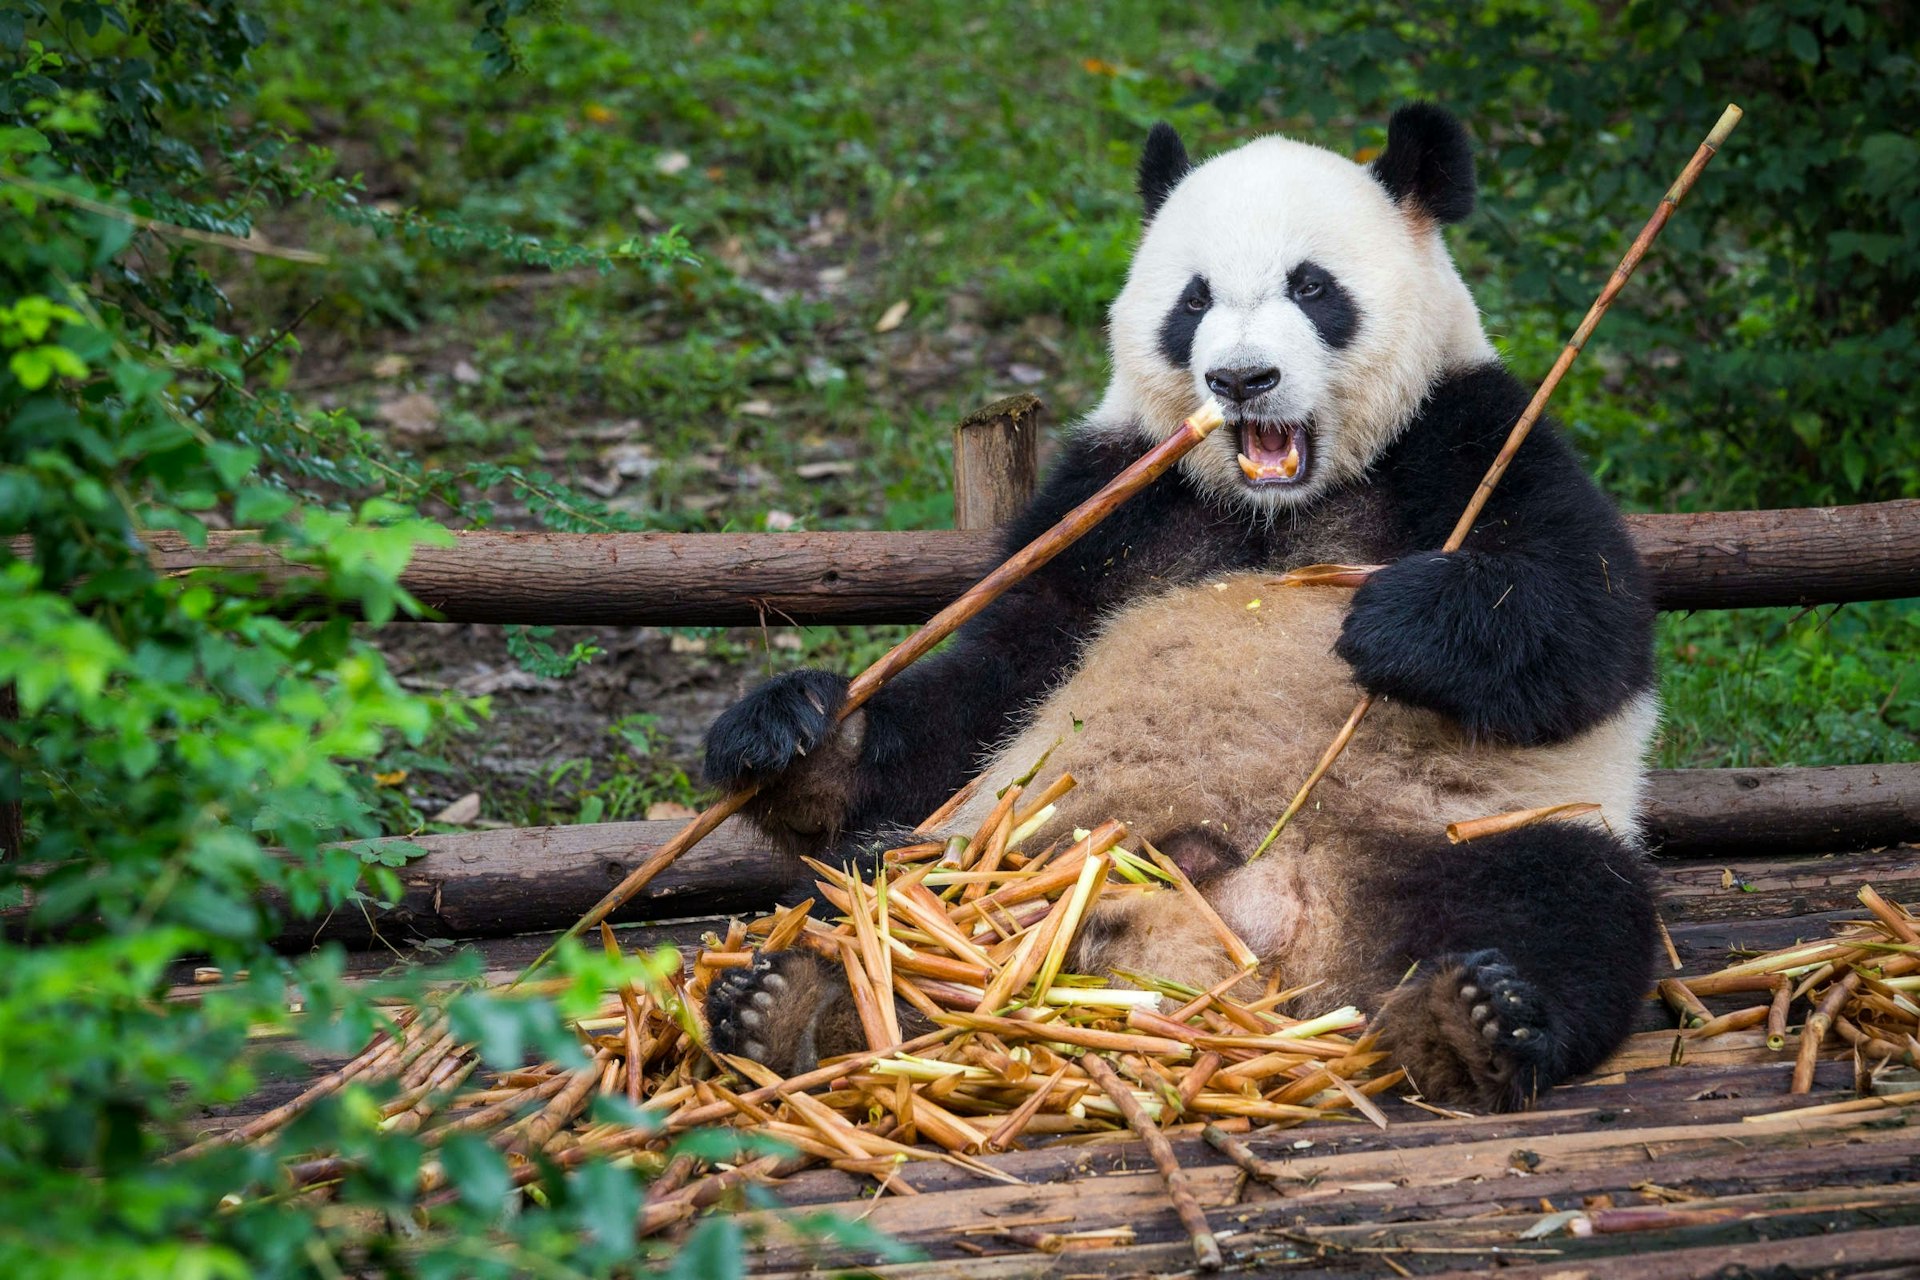 A giant panda sits eating long sticks of bamboo on a wooden deck surrounded by greenery